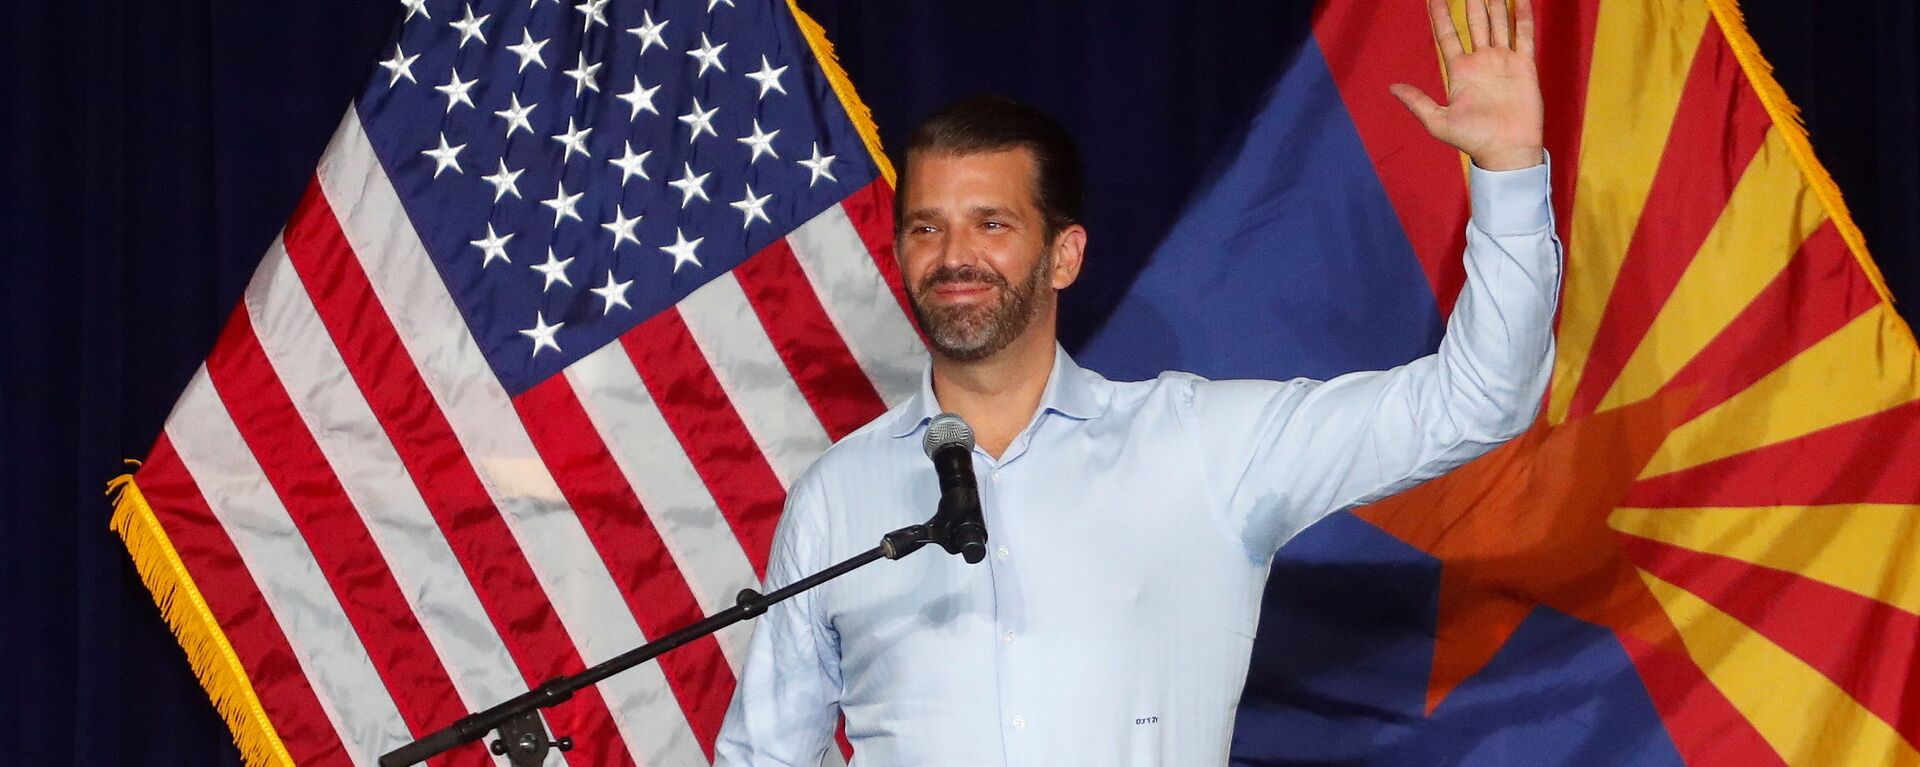 Donald Trump Jr. gestures during a campaign rally for U.S. President Donald Trump ahead of Election Day, in Scottsdale - Sputnik International, 1920, 06.11.2020